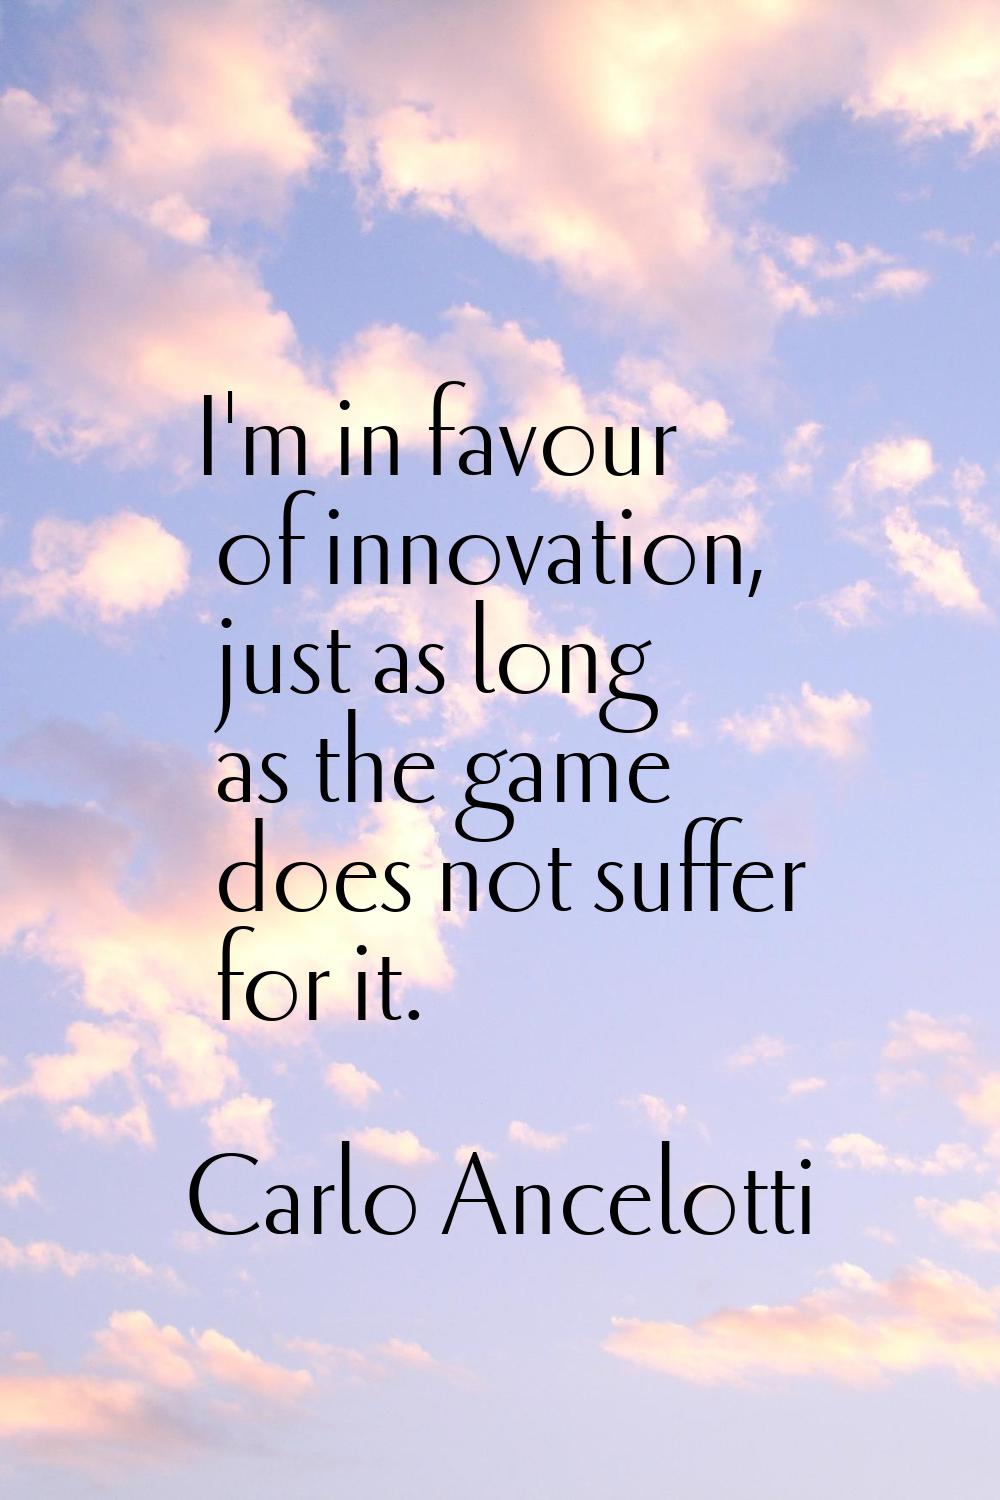 I'm in favour of innovation, just as long as the game does not suffer for it.